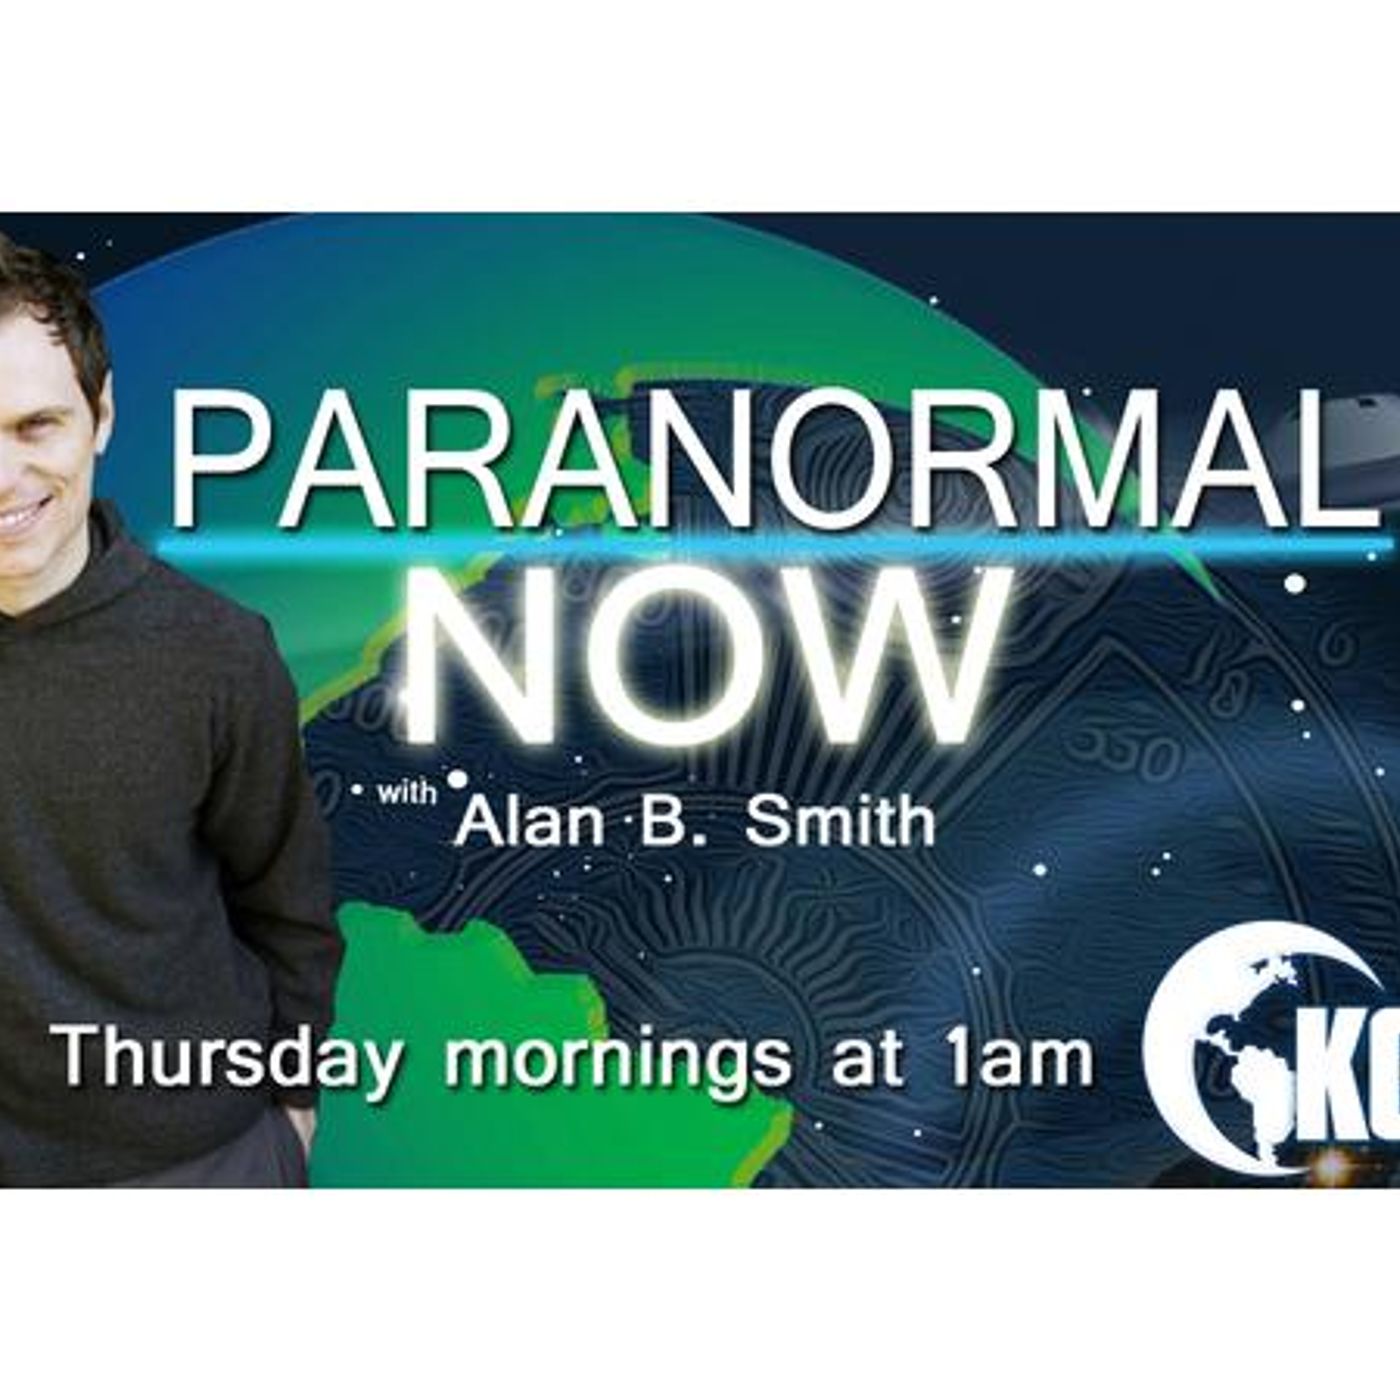 Paranormal Now | Update | Now on KGRA!